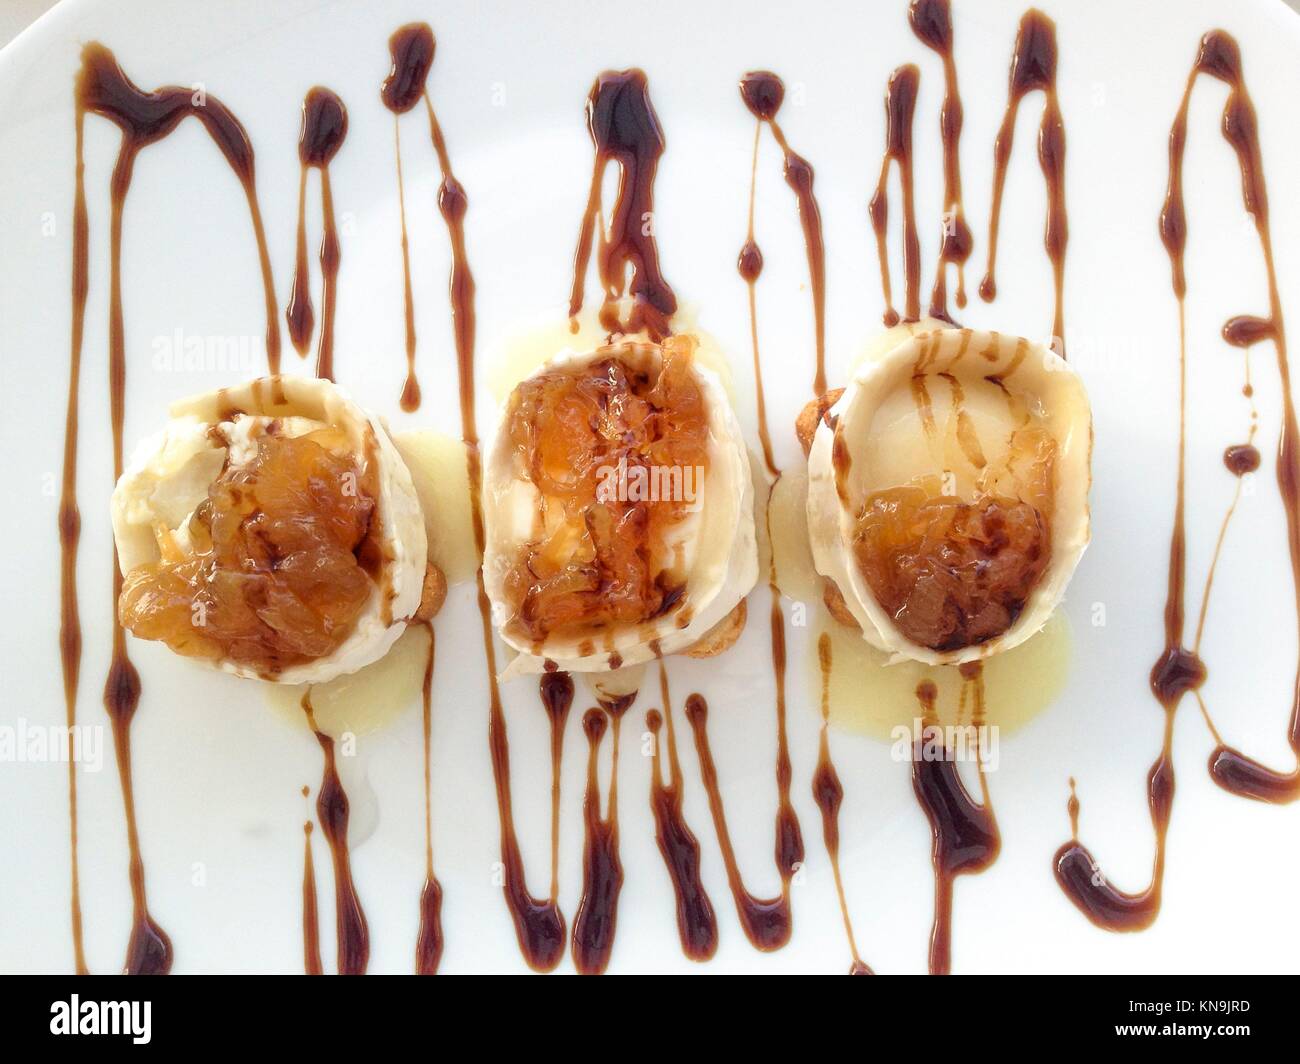 Goat cheese rolls with caramelized onions decorated with black vinegar sauce. Spanish tapa. Stock Photo